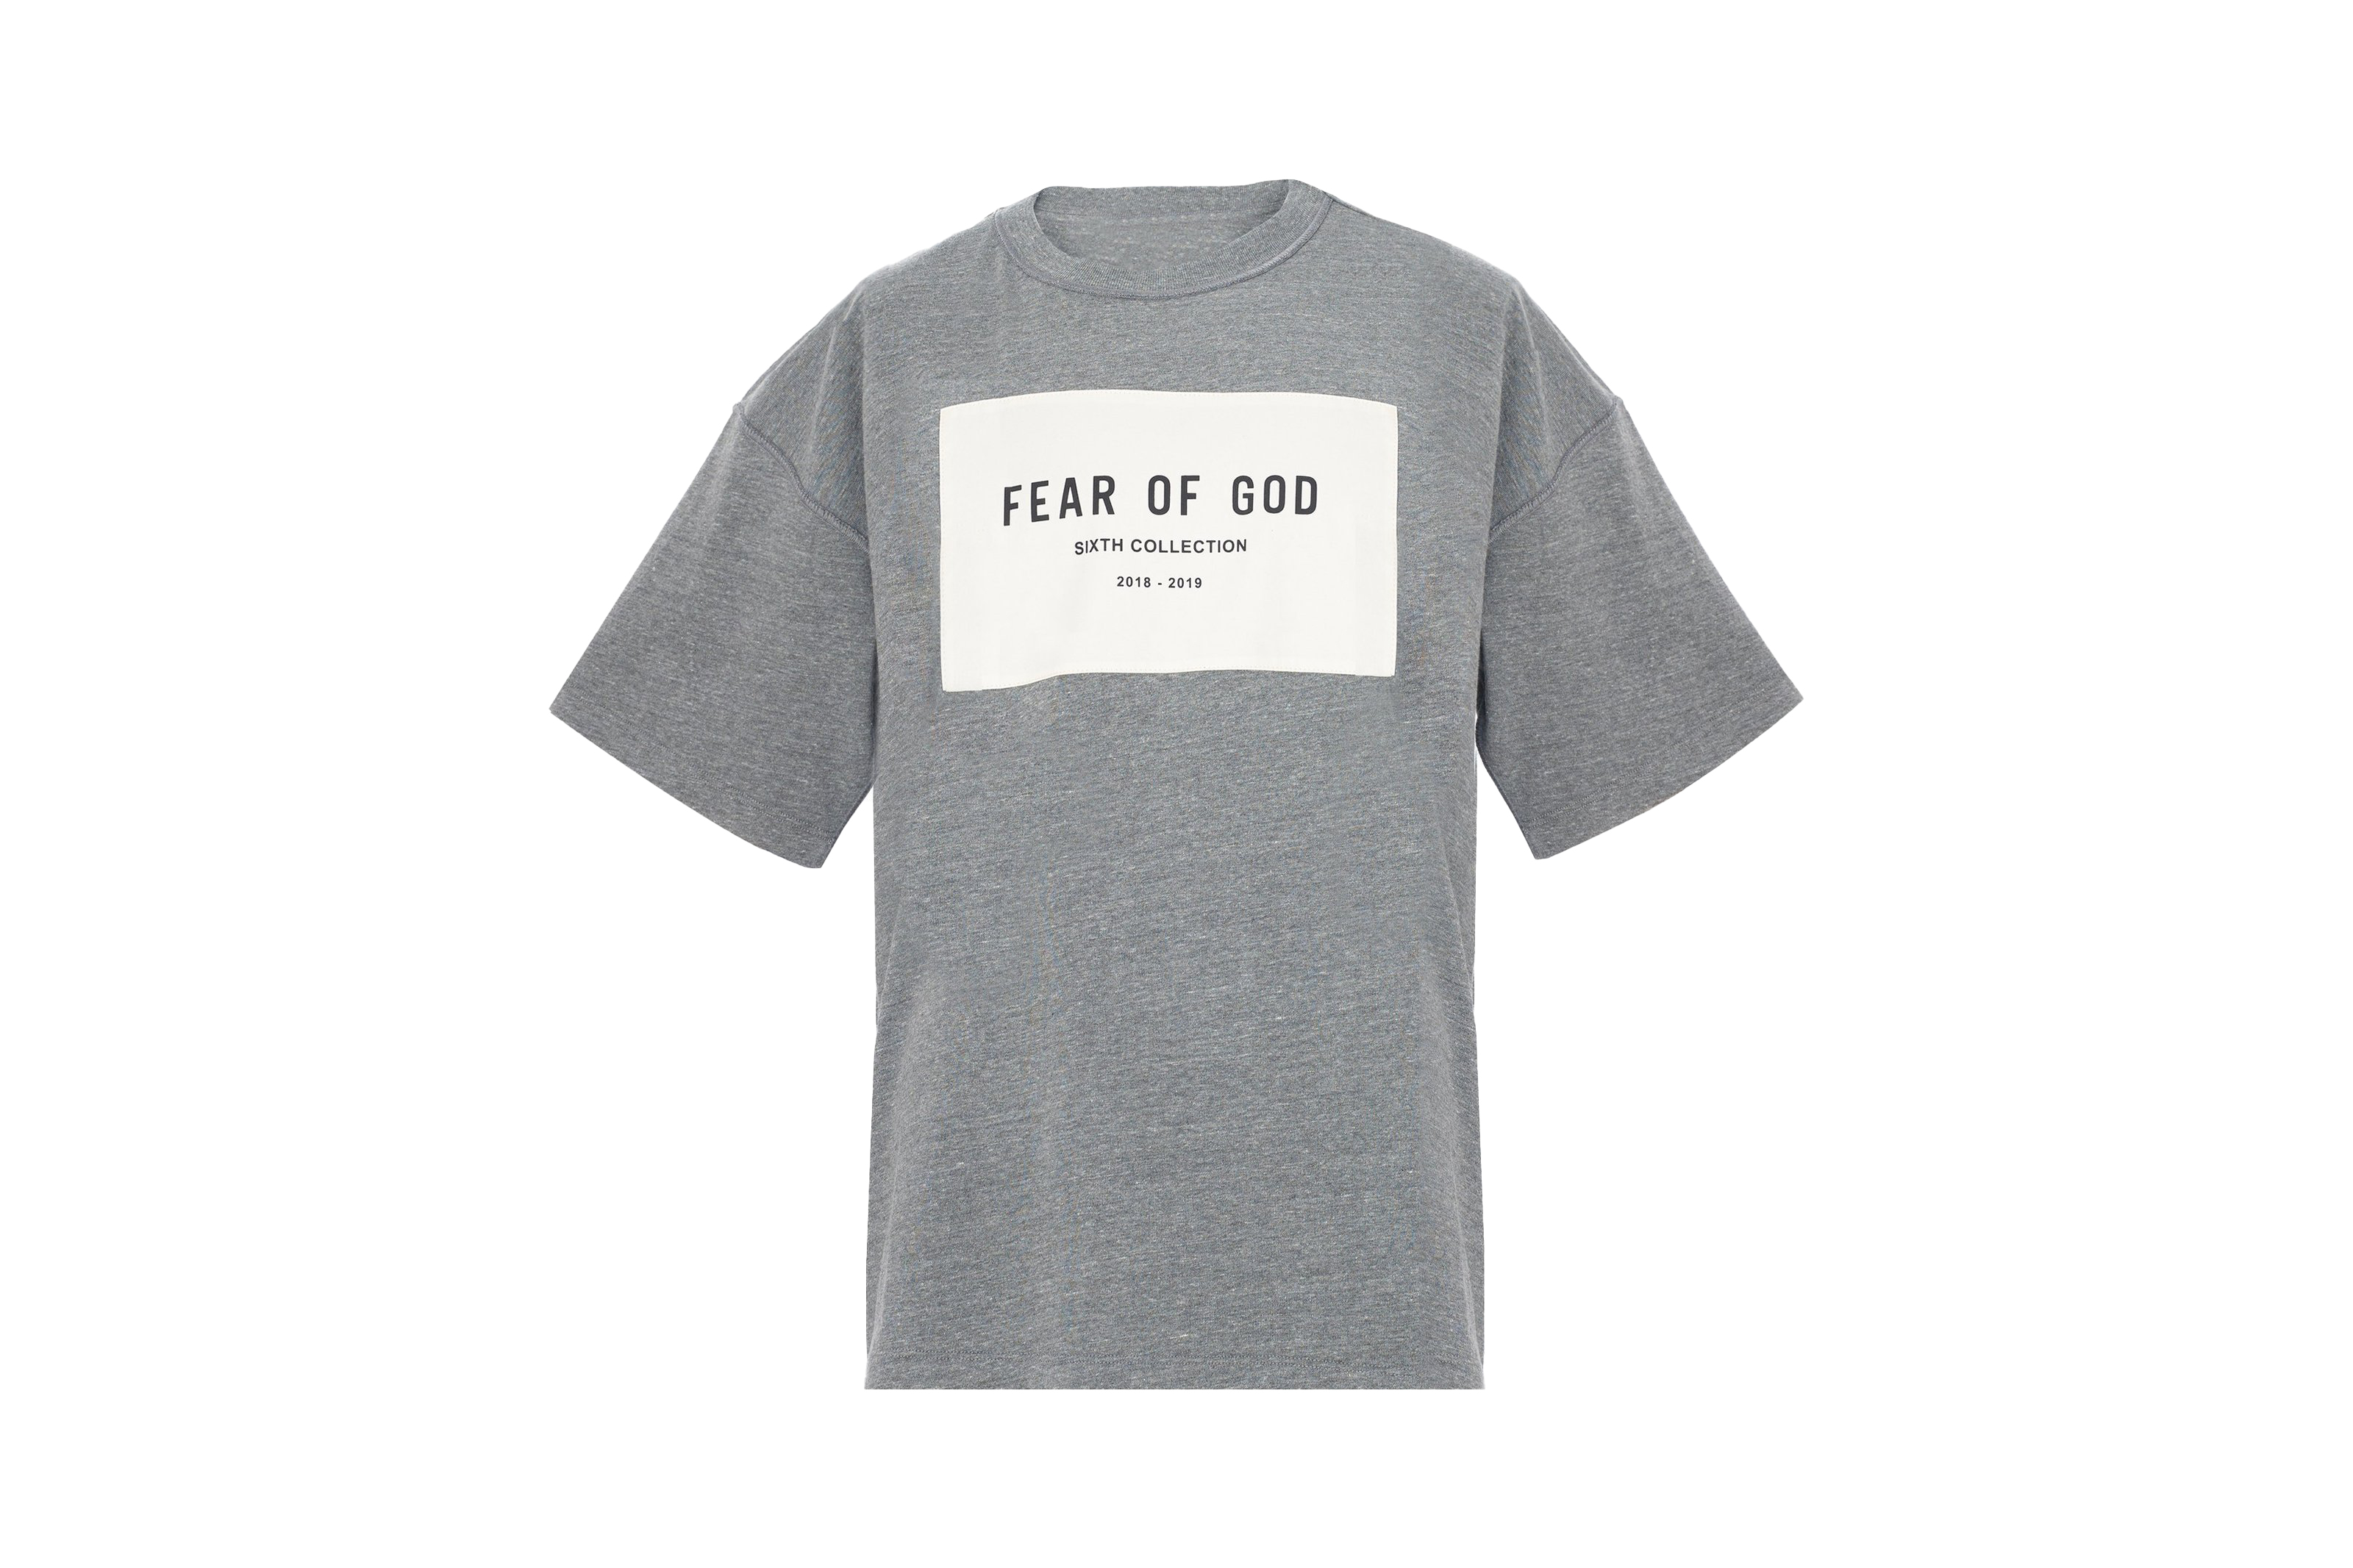 Fear of god sixth collection